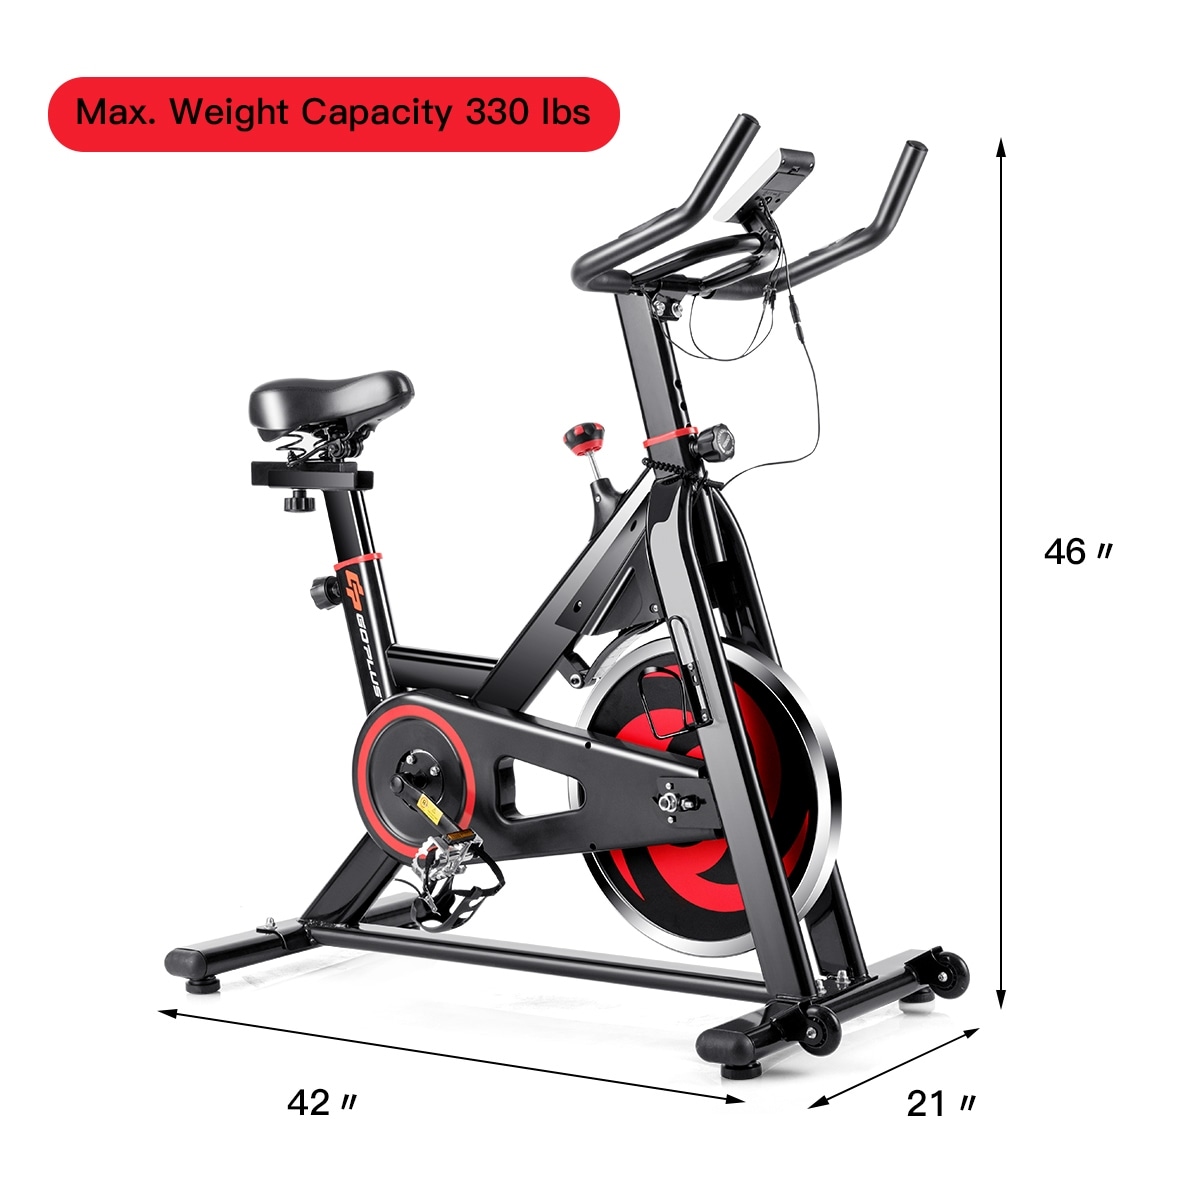 Details about   Heka Exercise Bicycle Indoor Cycling Fitness Stationary Bike w/ 40lbs Flywheel 